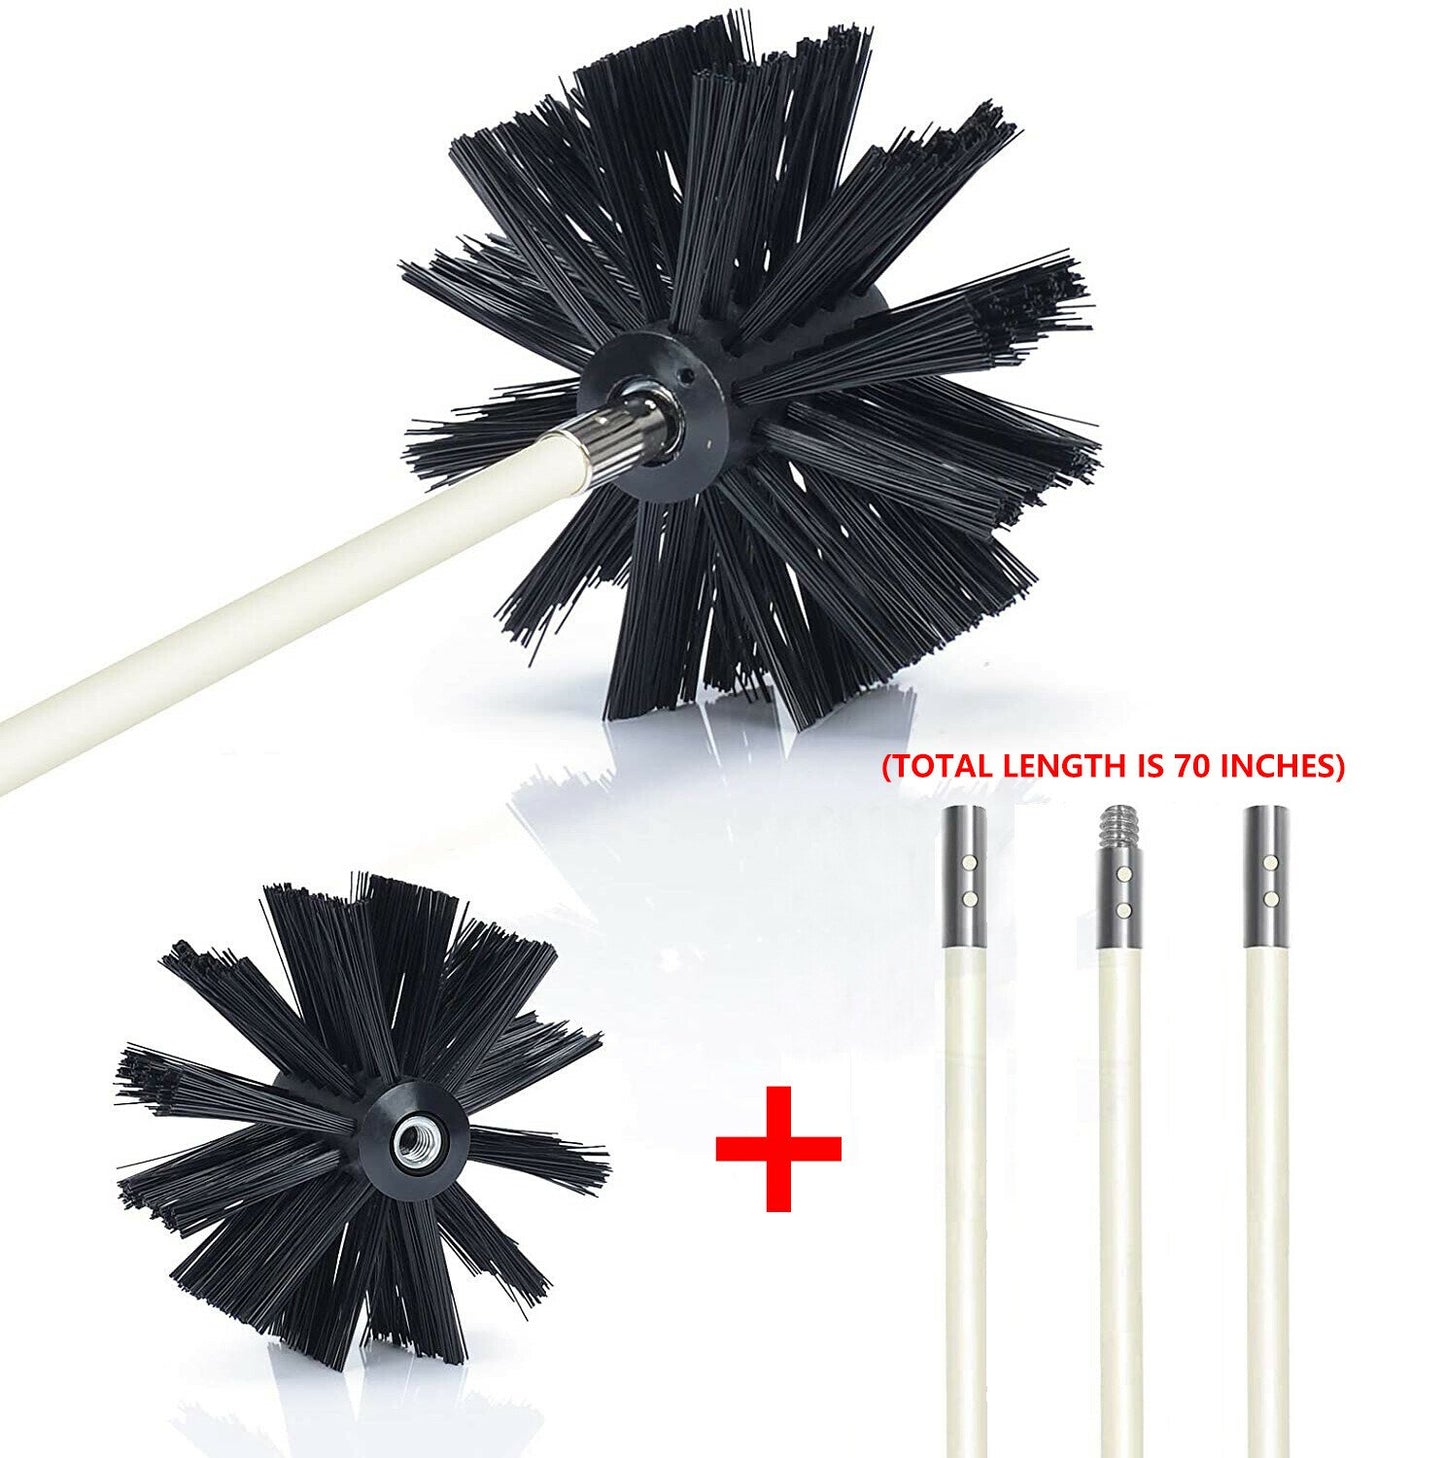 2023 Latest Upgrade Pipe Inner Cleaning Brush-Adopt Nano-Fusion Technology(BUY 5 FREE SHIPPING)